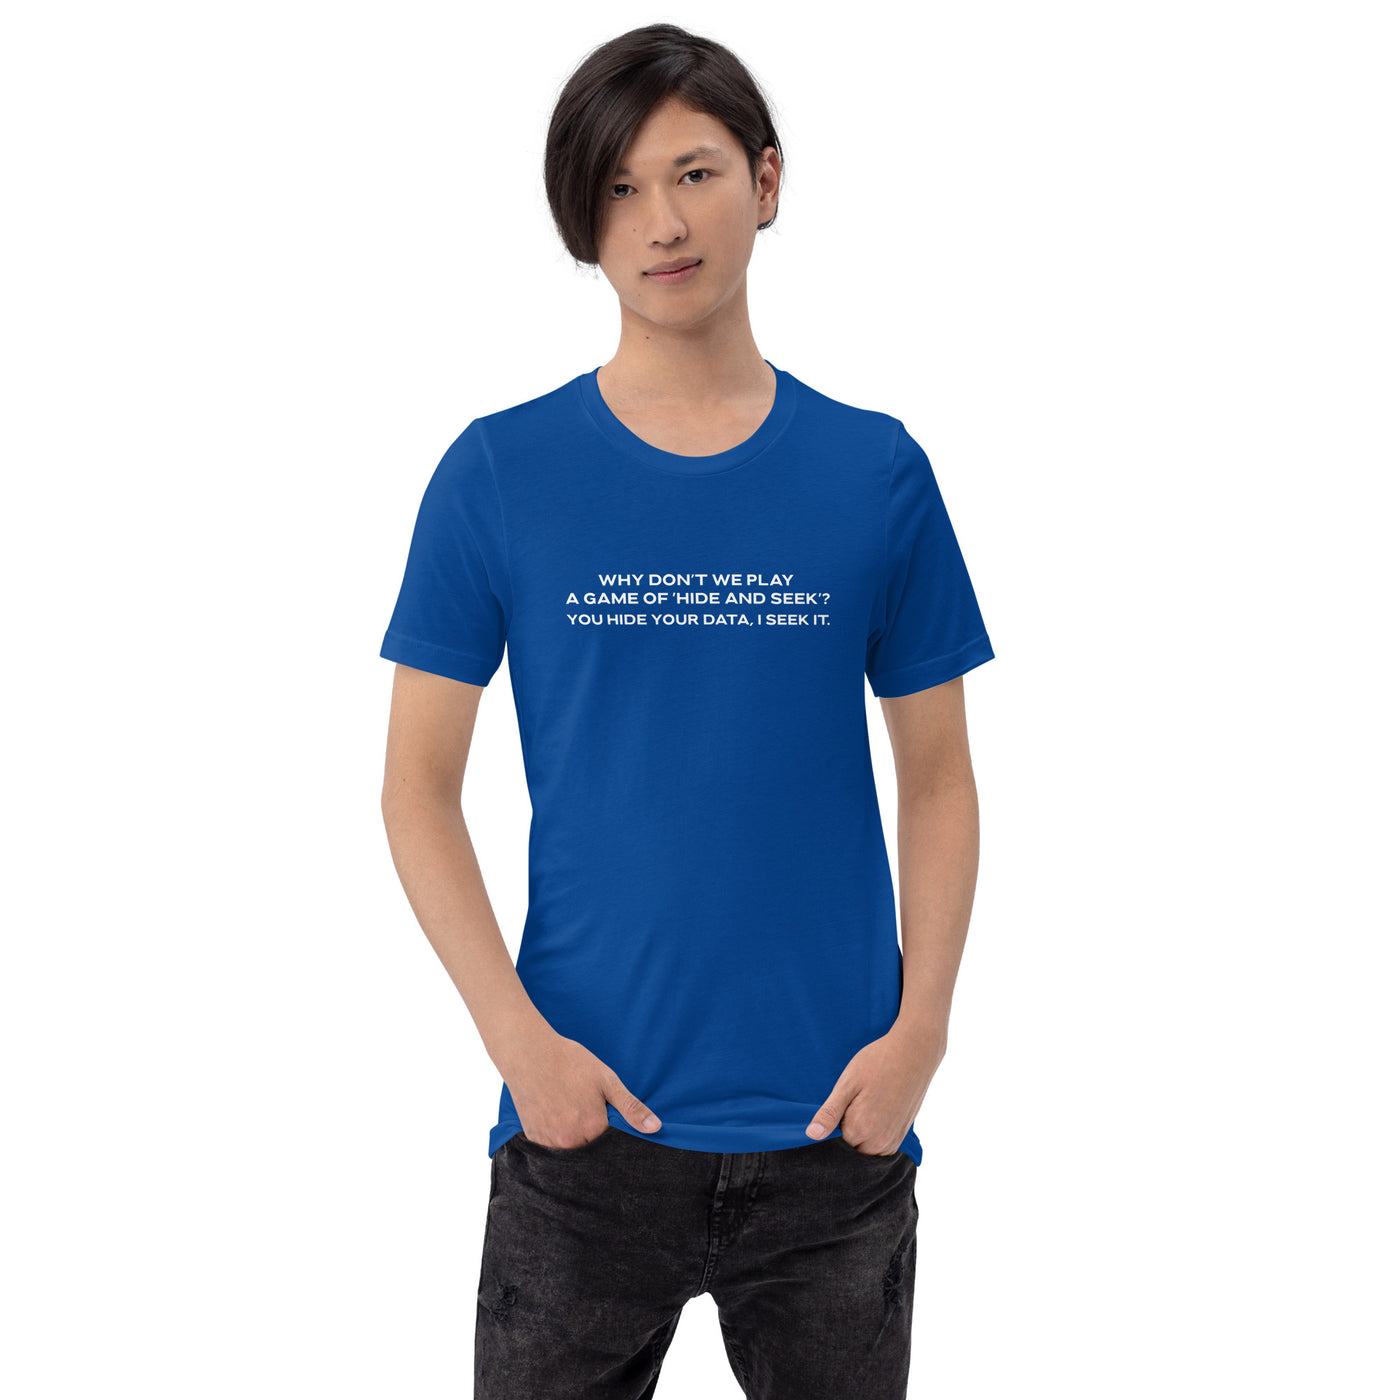 Why don't we Play a game of Hide and Seek V2 - Unisex t-shirt